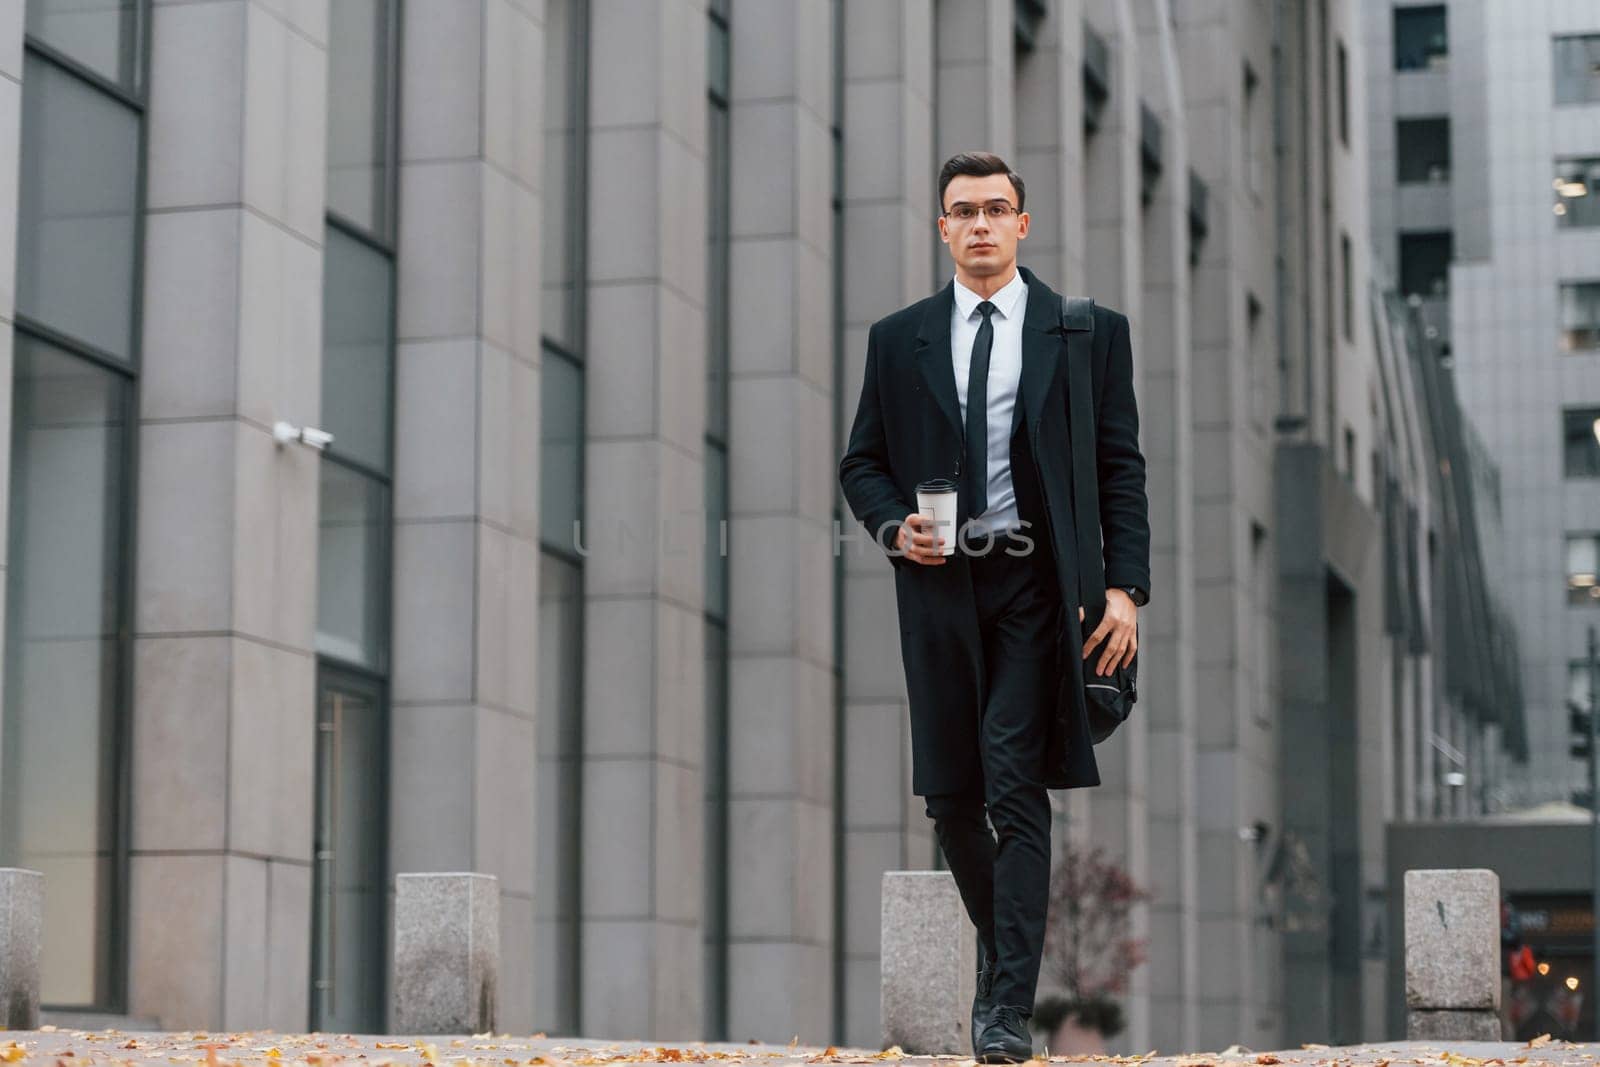 With cup of drink. Businessman in black suit and tie is outdoors in the city by Standret